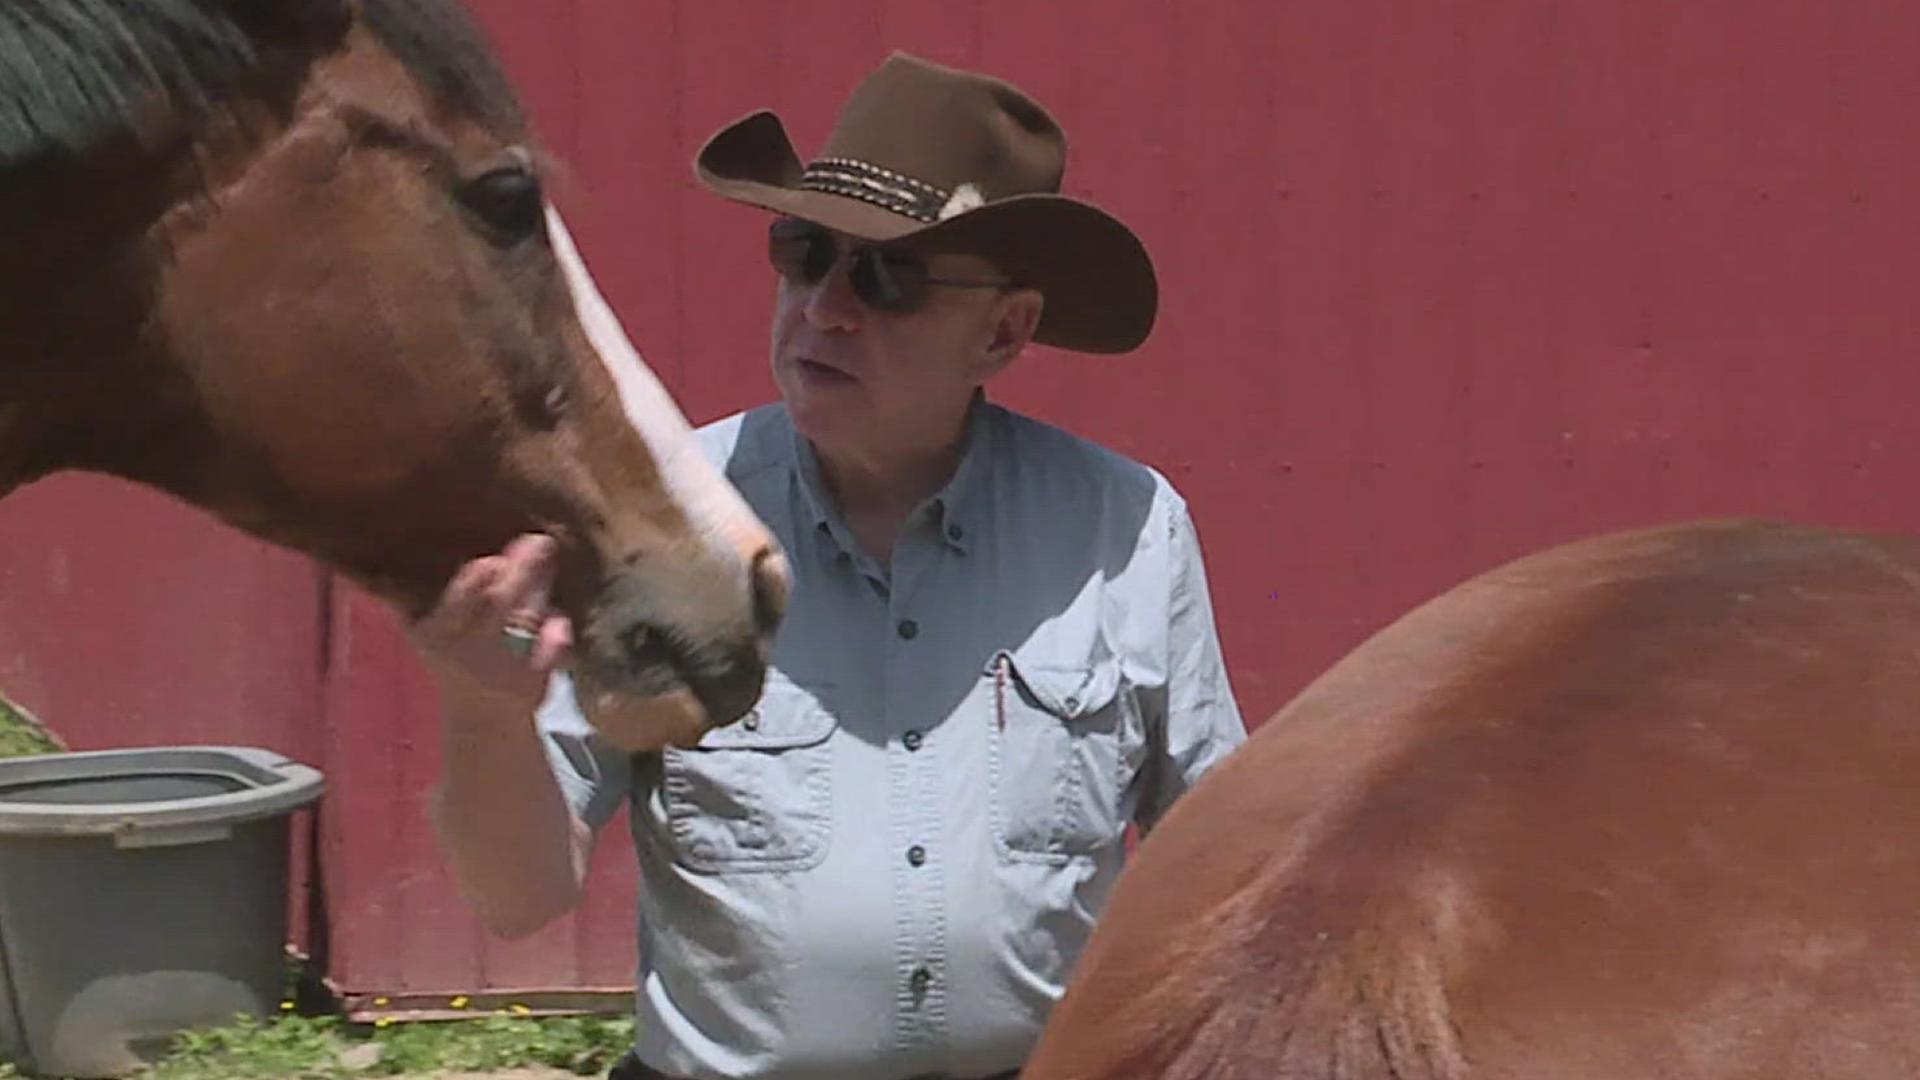 An Adams County couple are ready to provide free equine therapy for veterans after two years of preparing